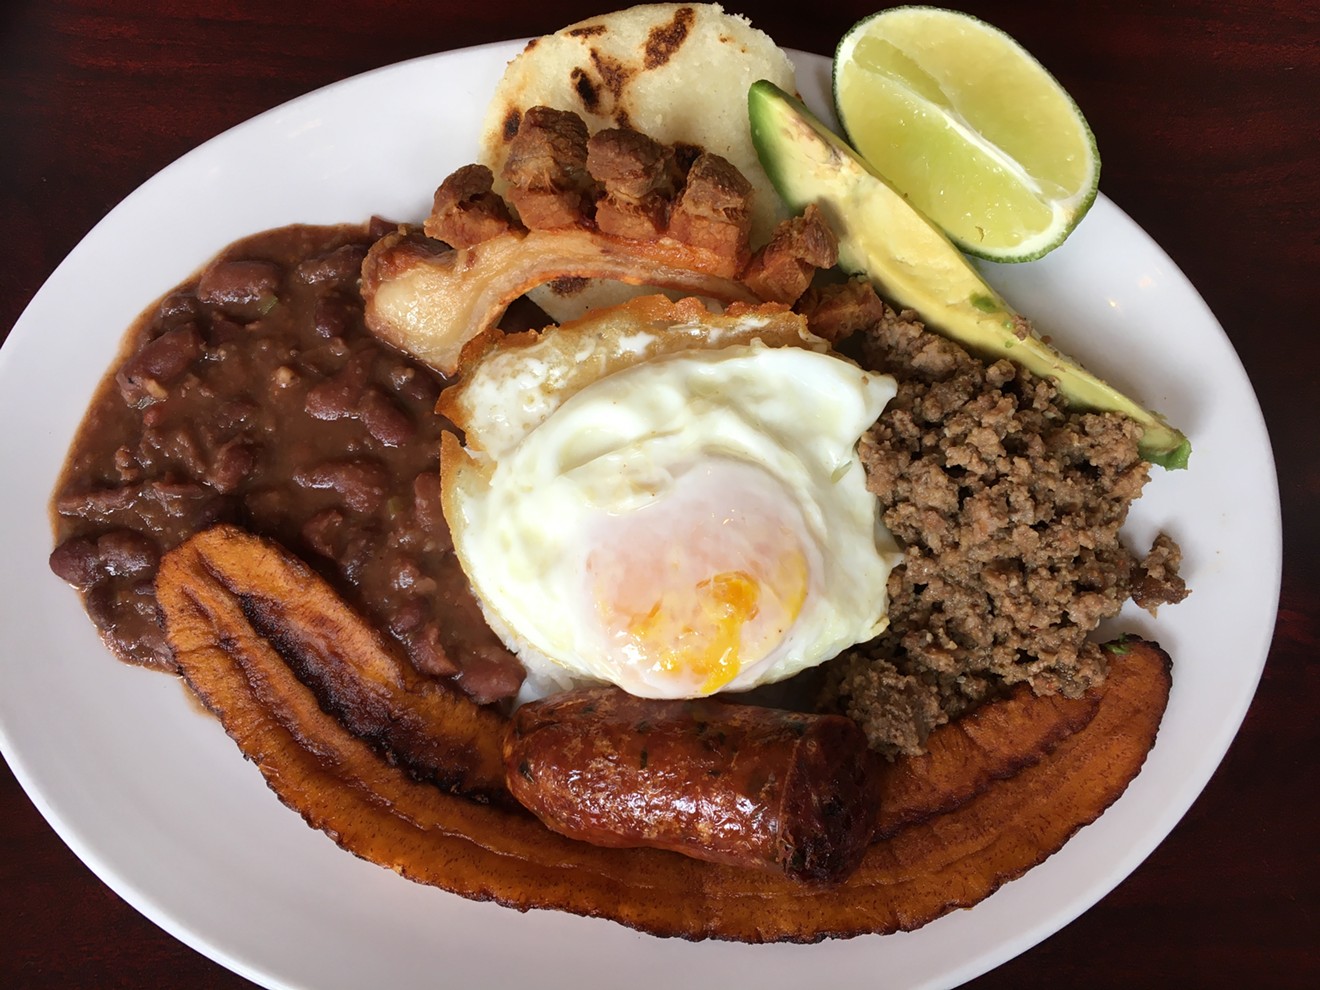 This is just the sampler size of the bandeja paisa at Los Parceros. Be prepared for leftovers.